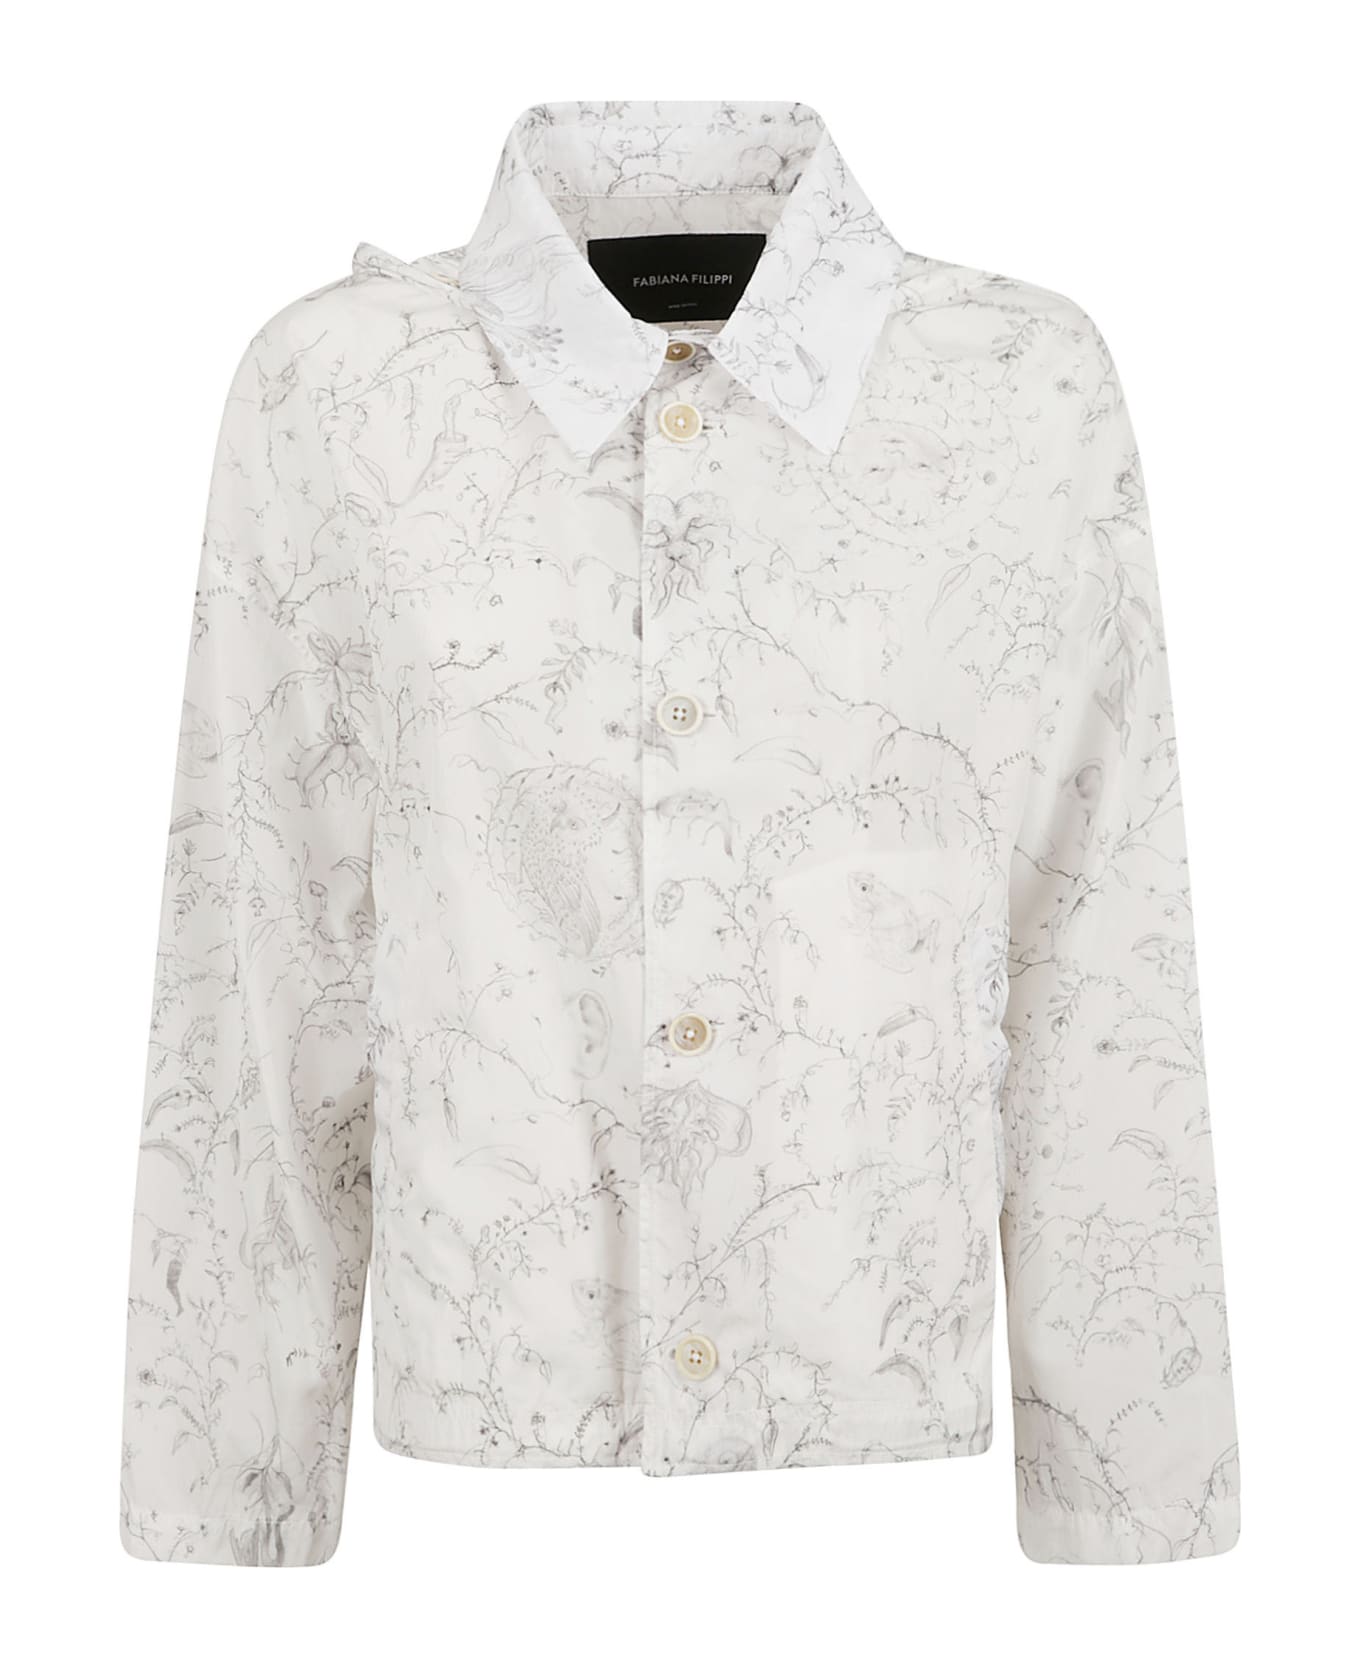 Fabiana Filippi Printed All-over Shirt - ONLY ONE COLOR